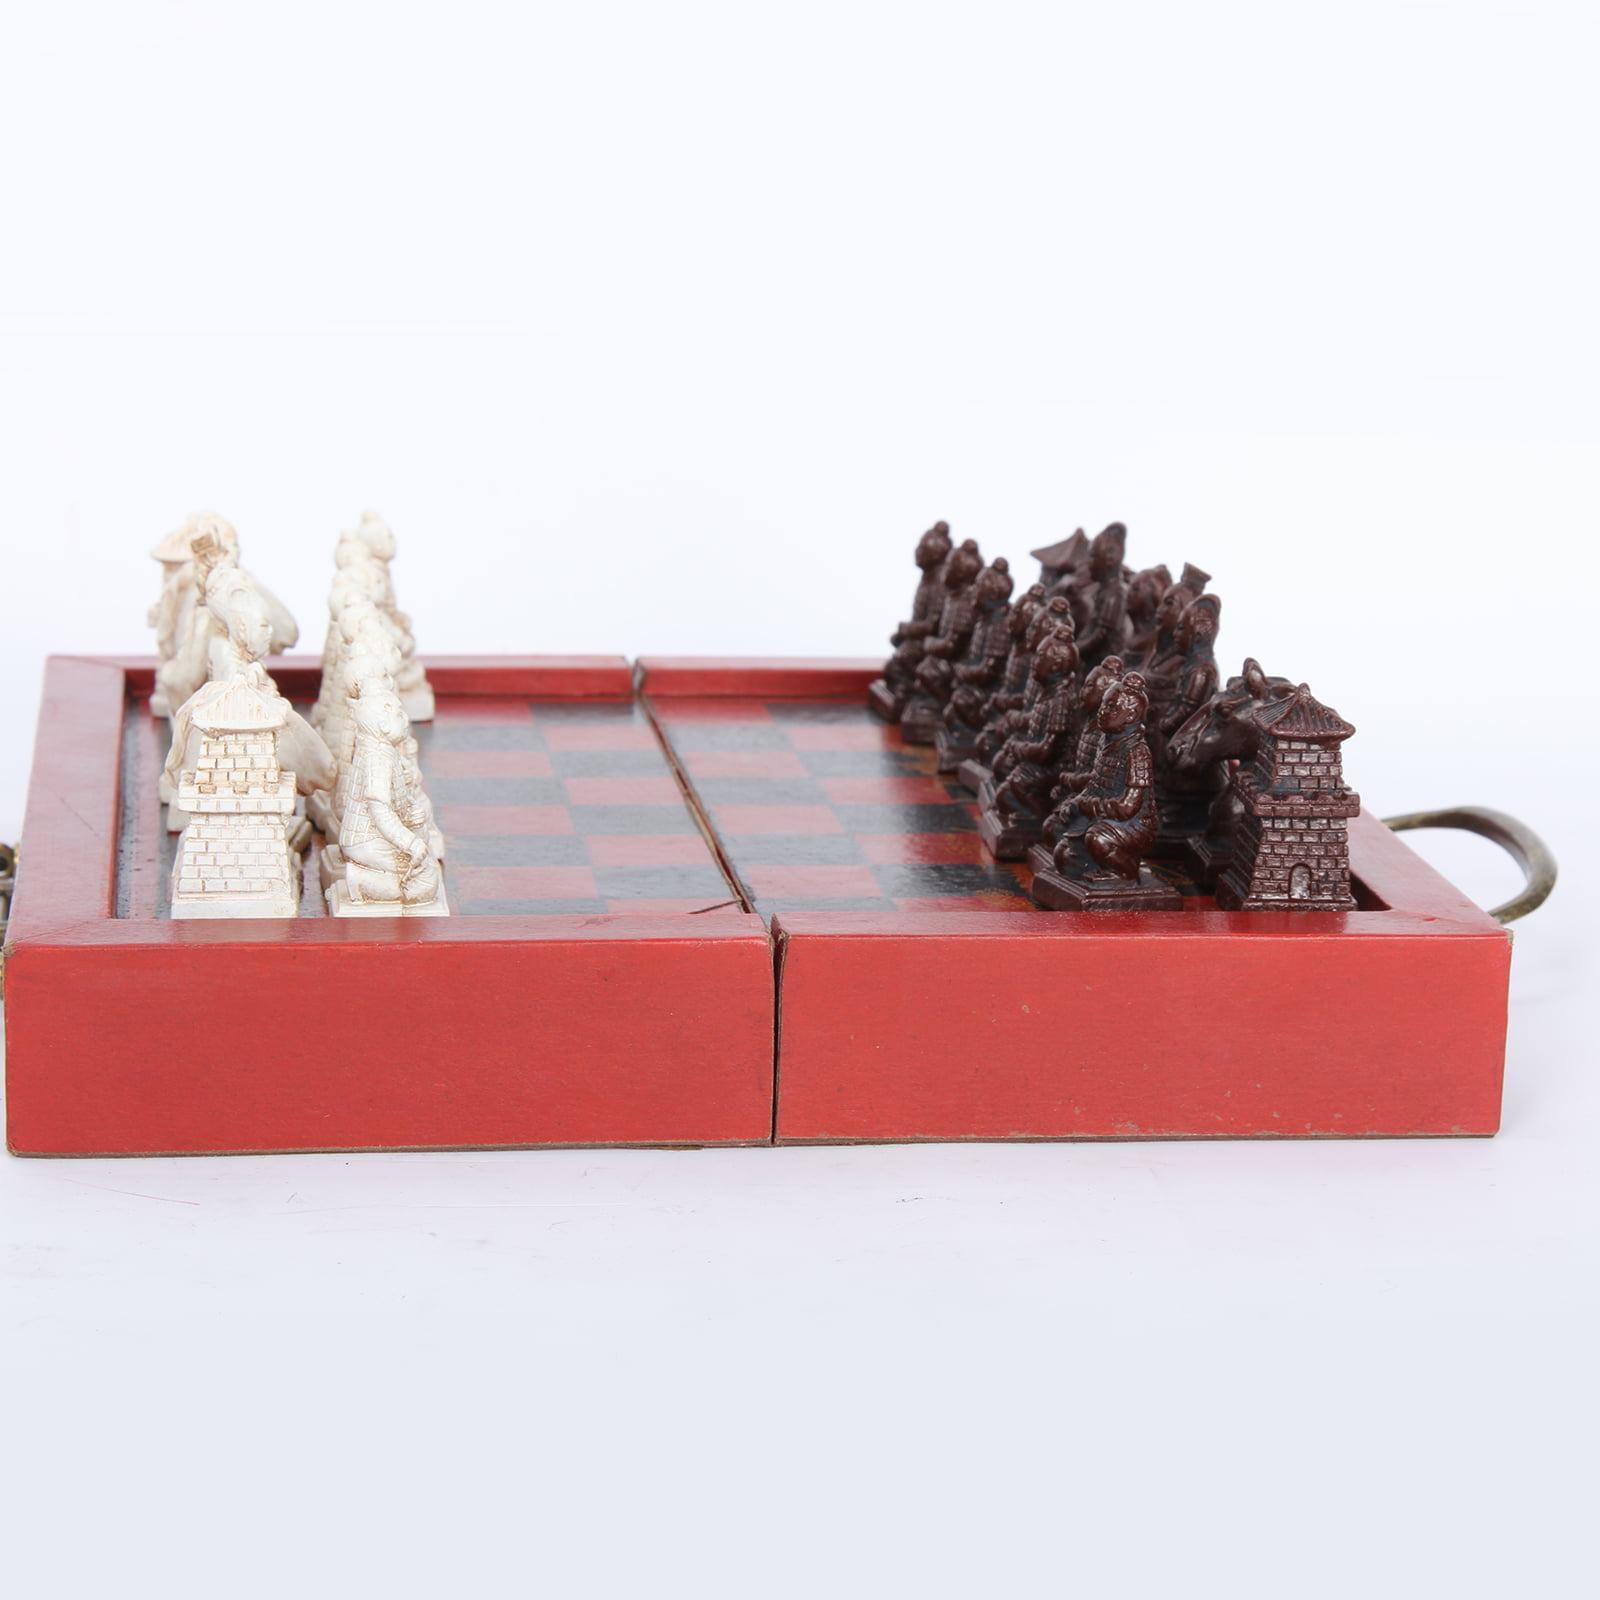 8 Inch Folding Wooden Board & Details about   Handmade Antique Chinese International Chess Set 